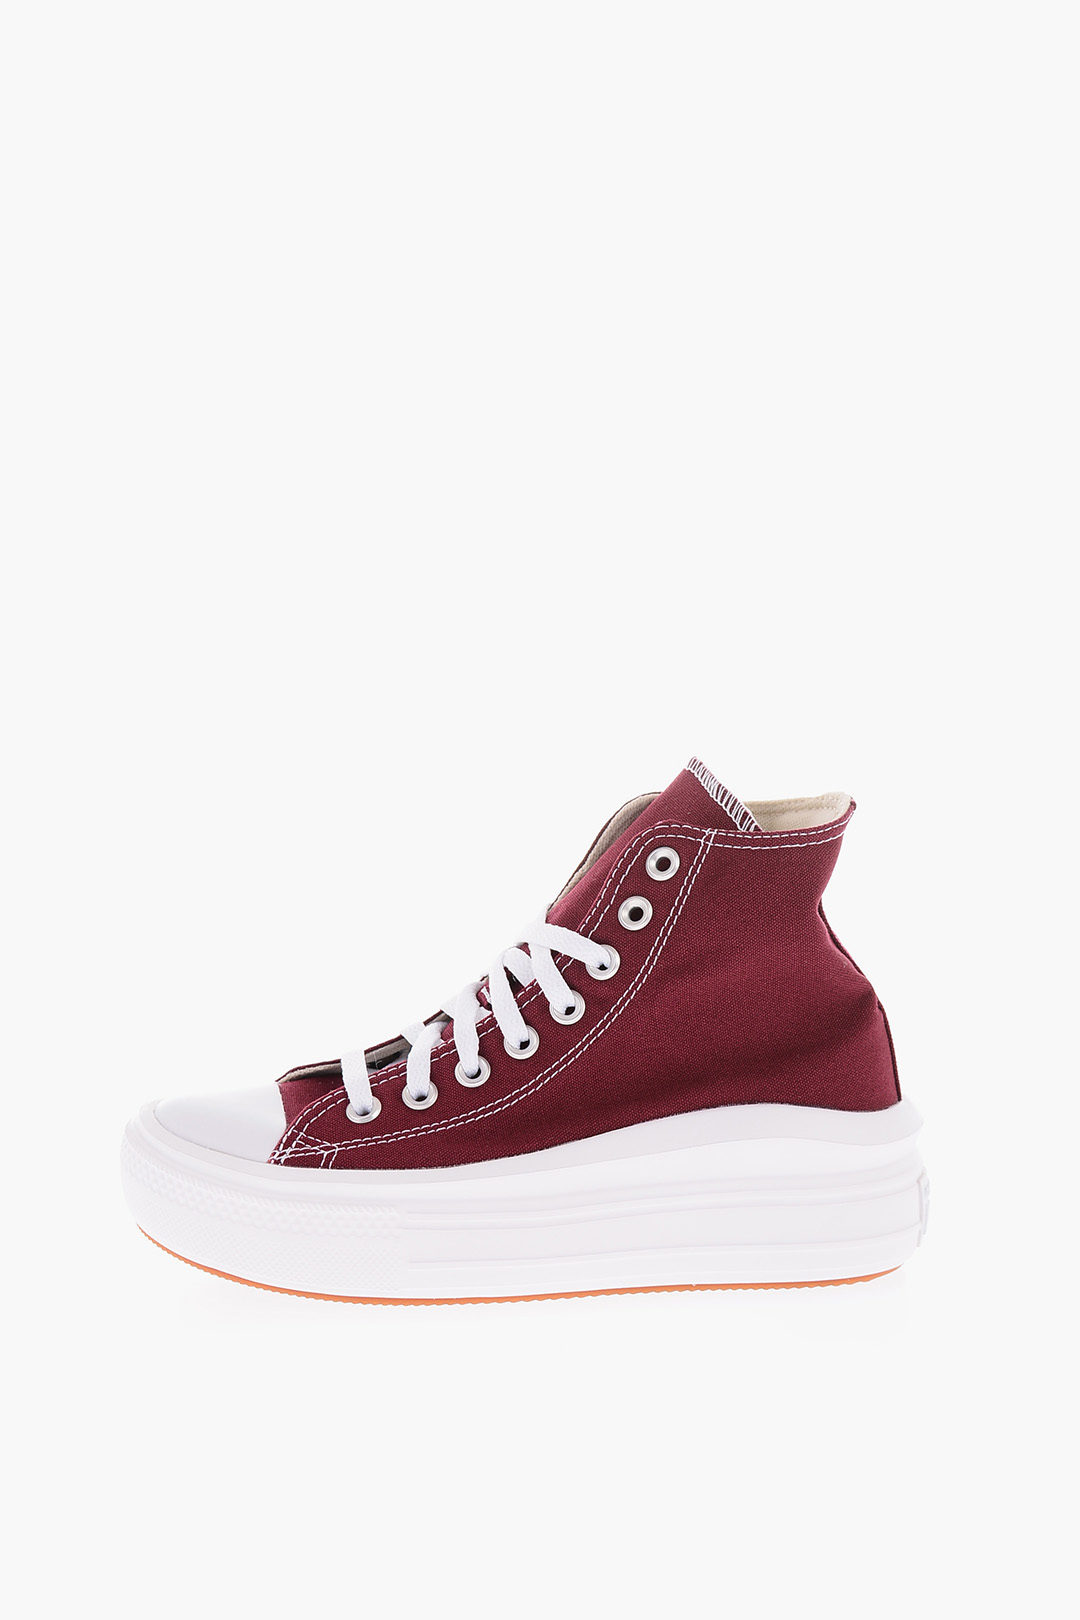 Converse ALL CHUCK TAYLOR High Sneakers with Platform women - Glamood Outlet